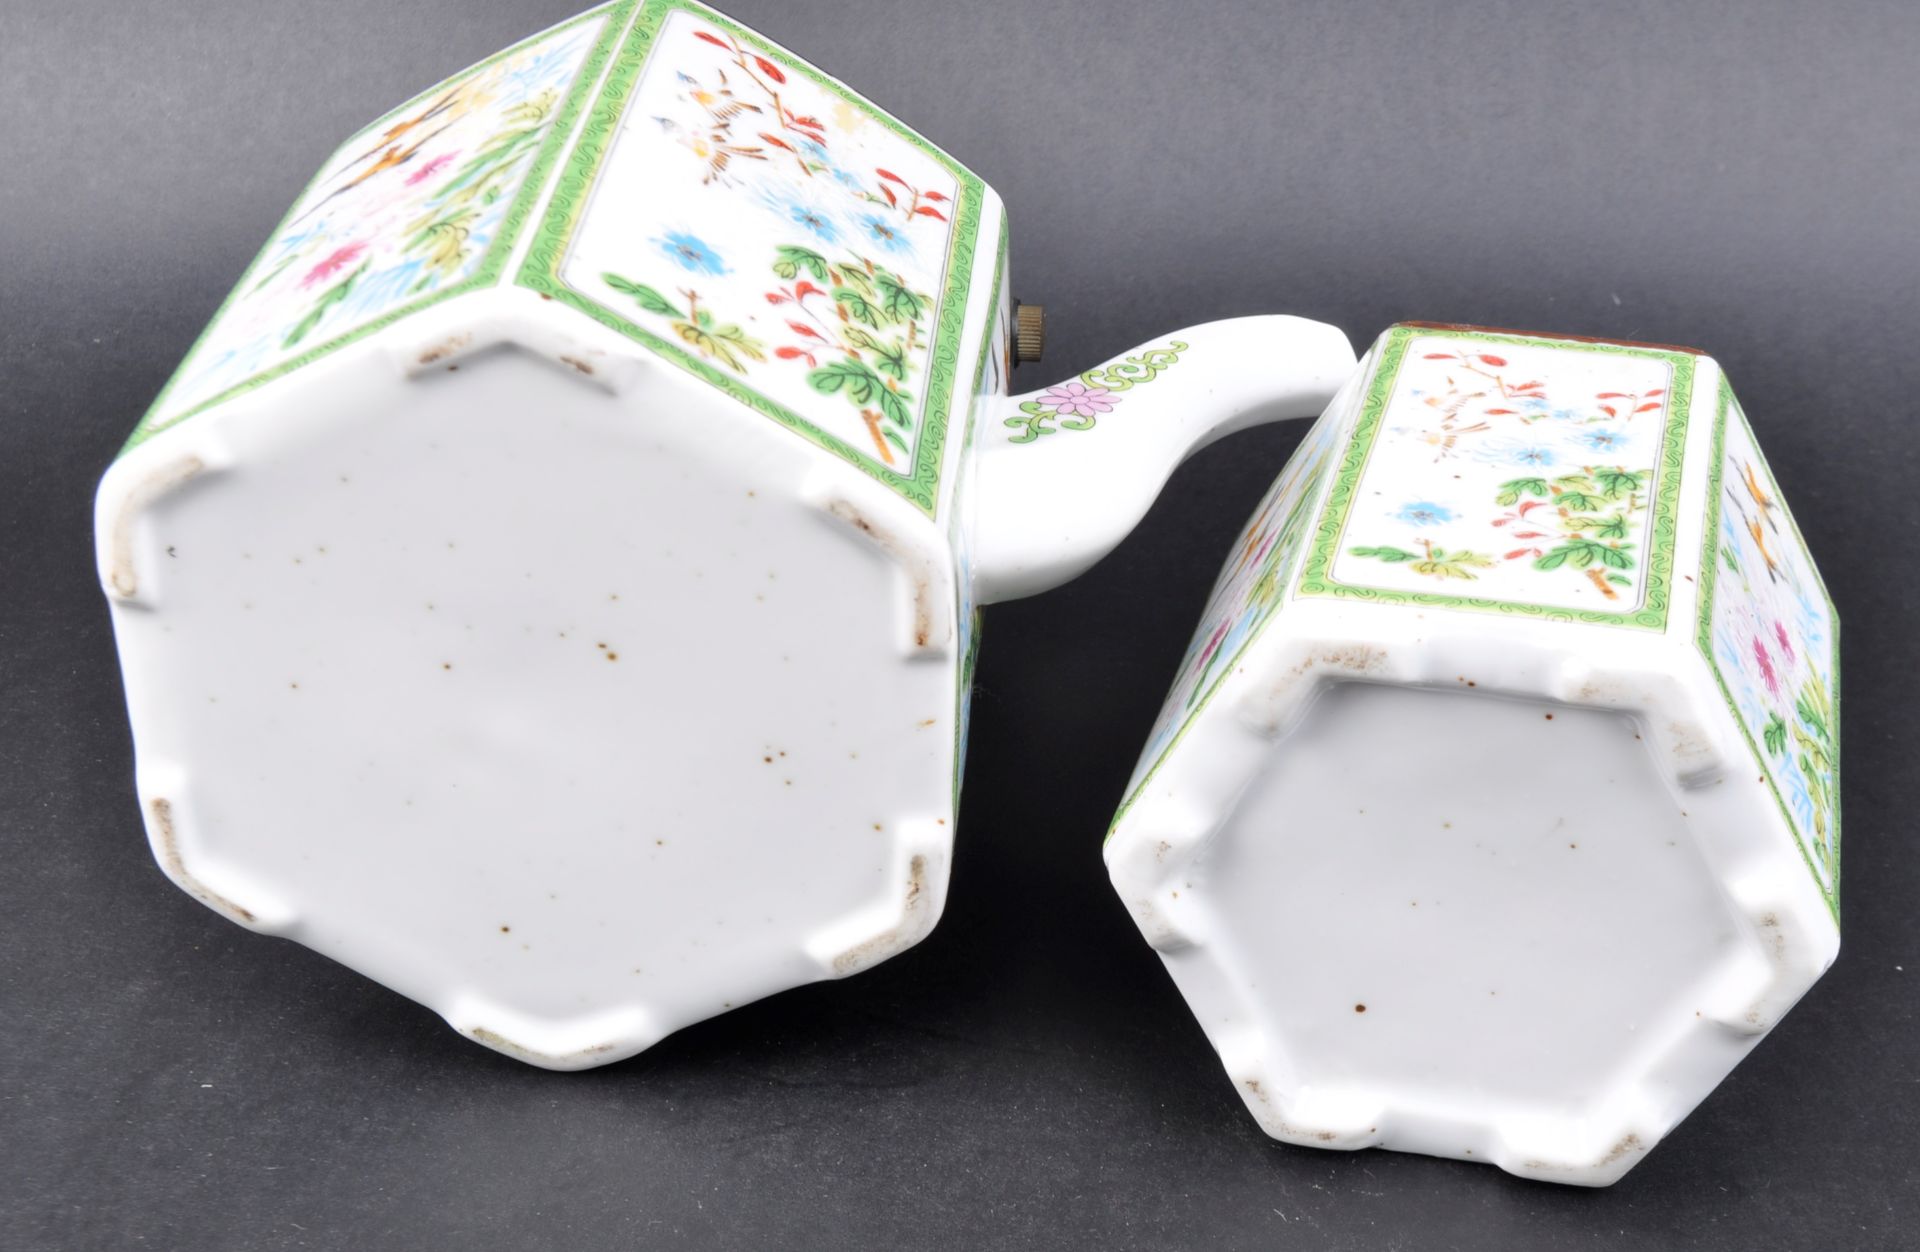 EARLY 20TH CENTURY CHINESE PORCELAIN TEA CADDY & TEAPOT - Image 10 of 10